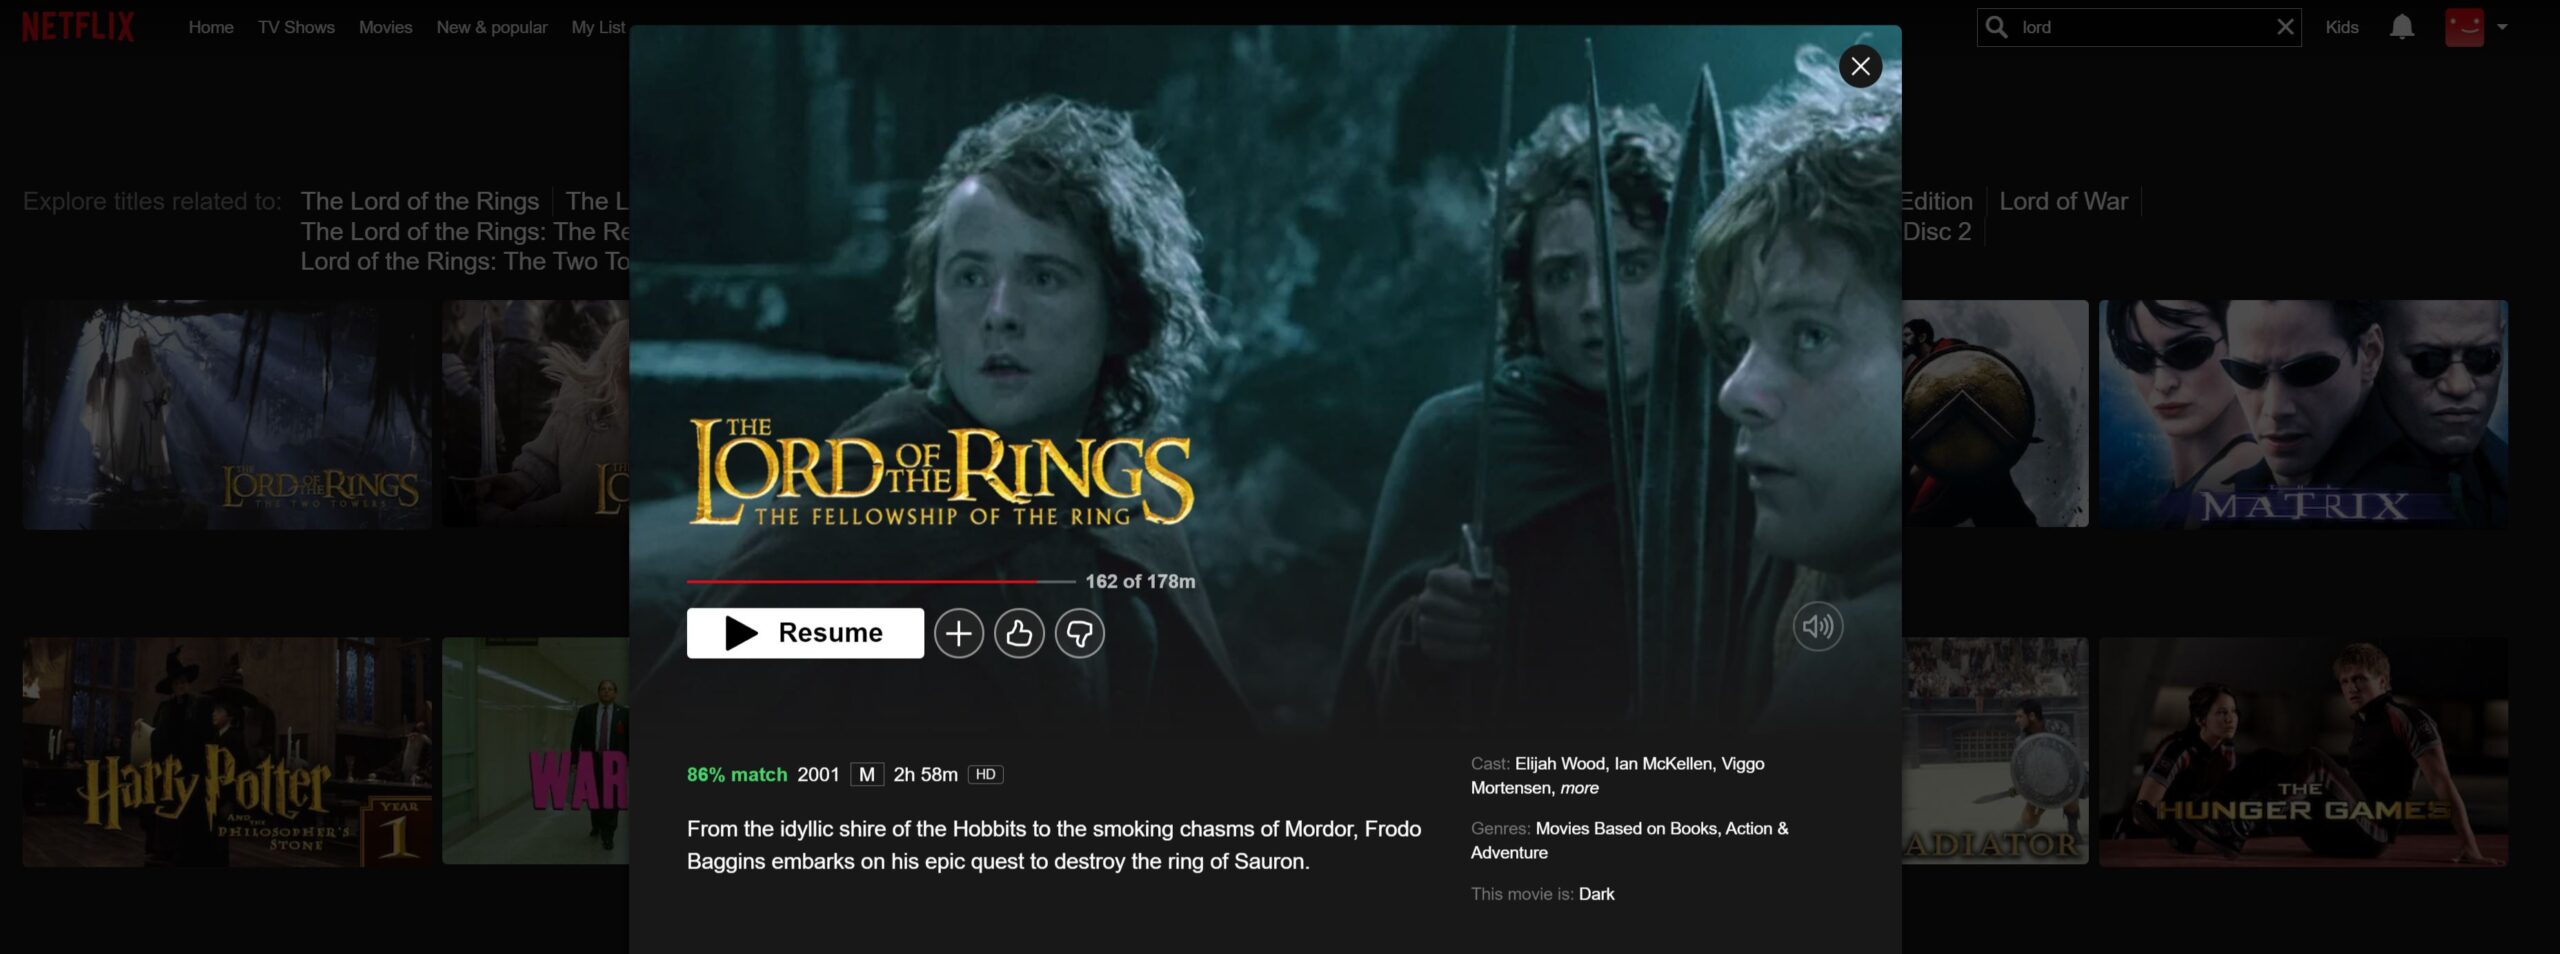 Lord of the rings Netflix